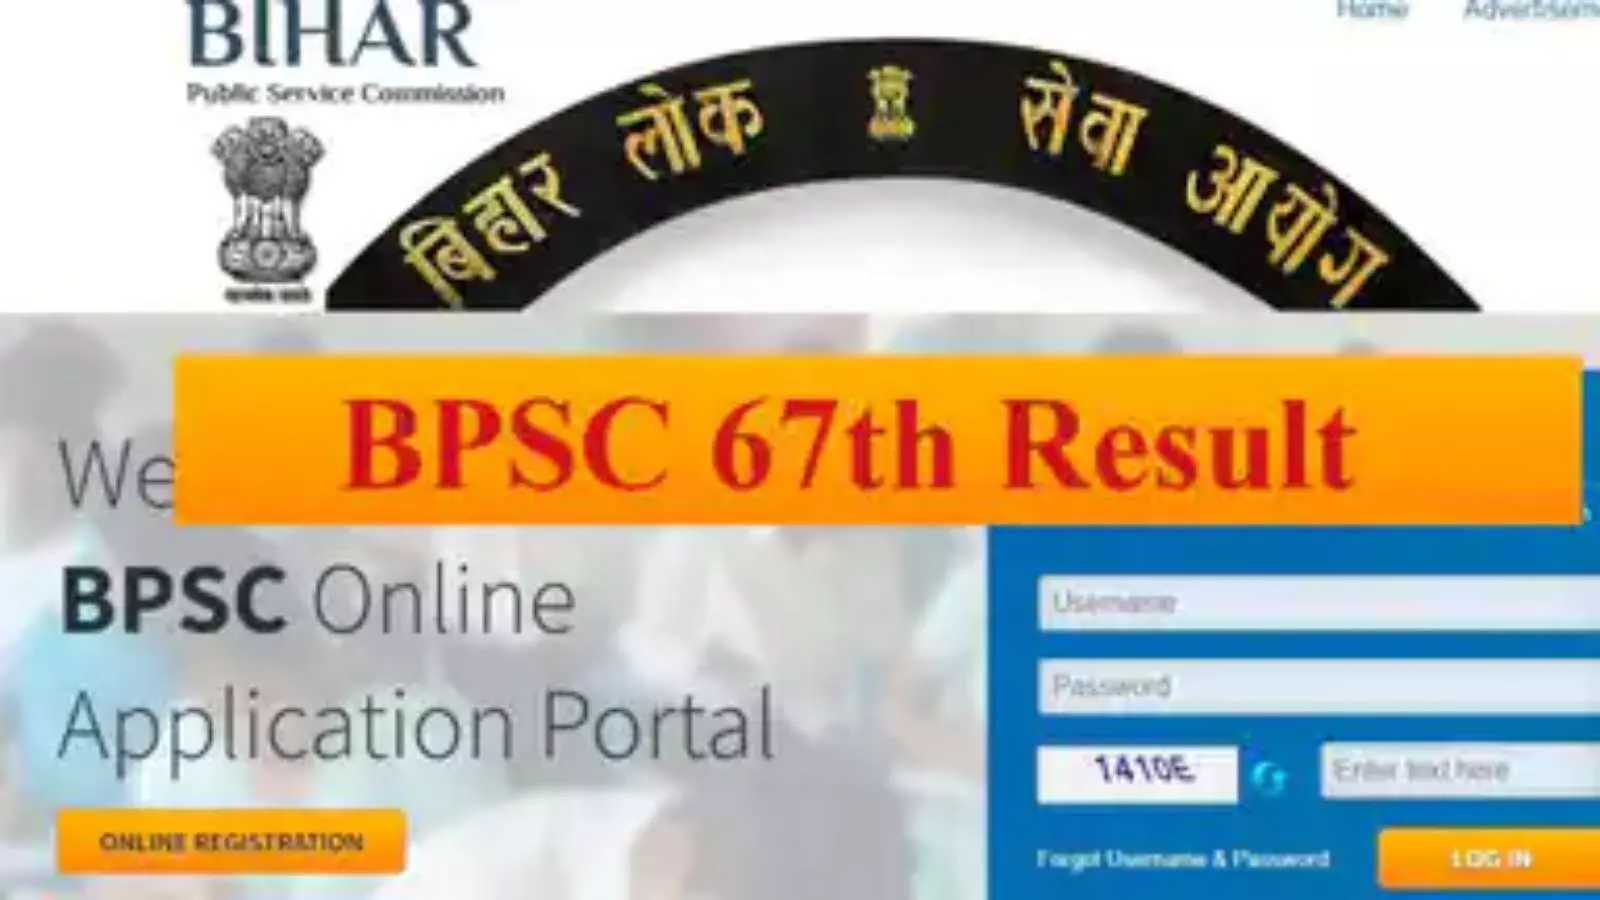 BPSC 67th Result released may be one week